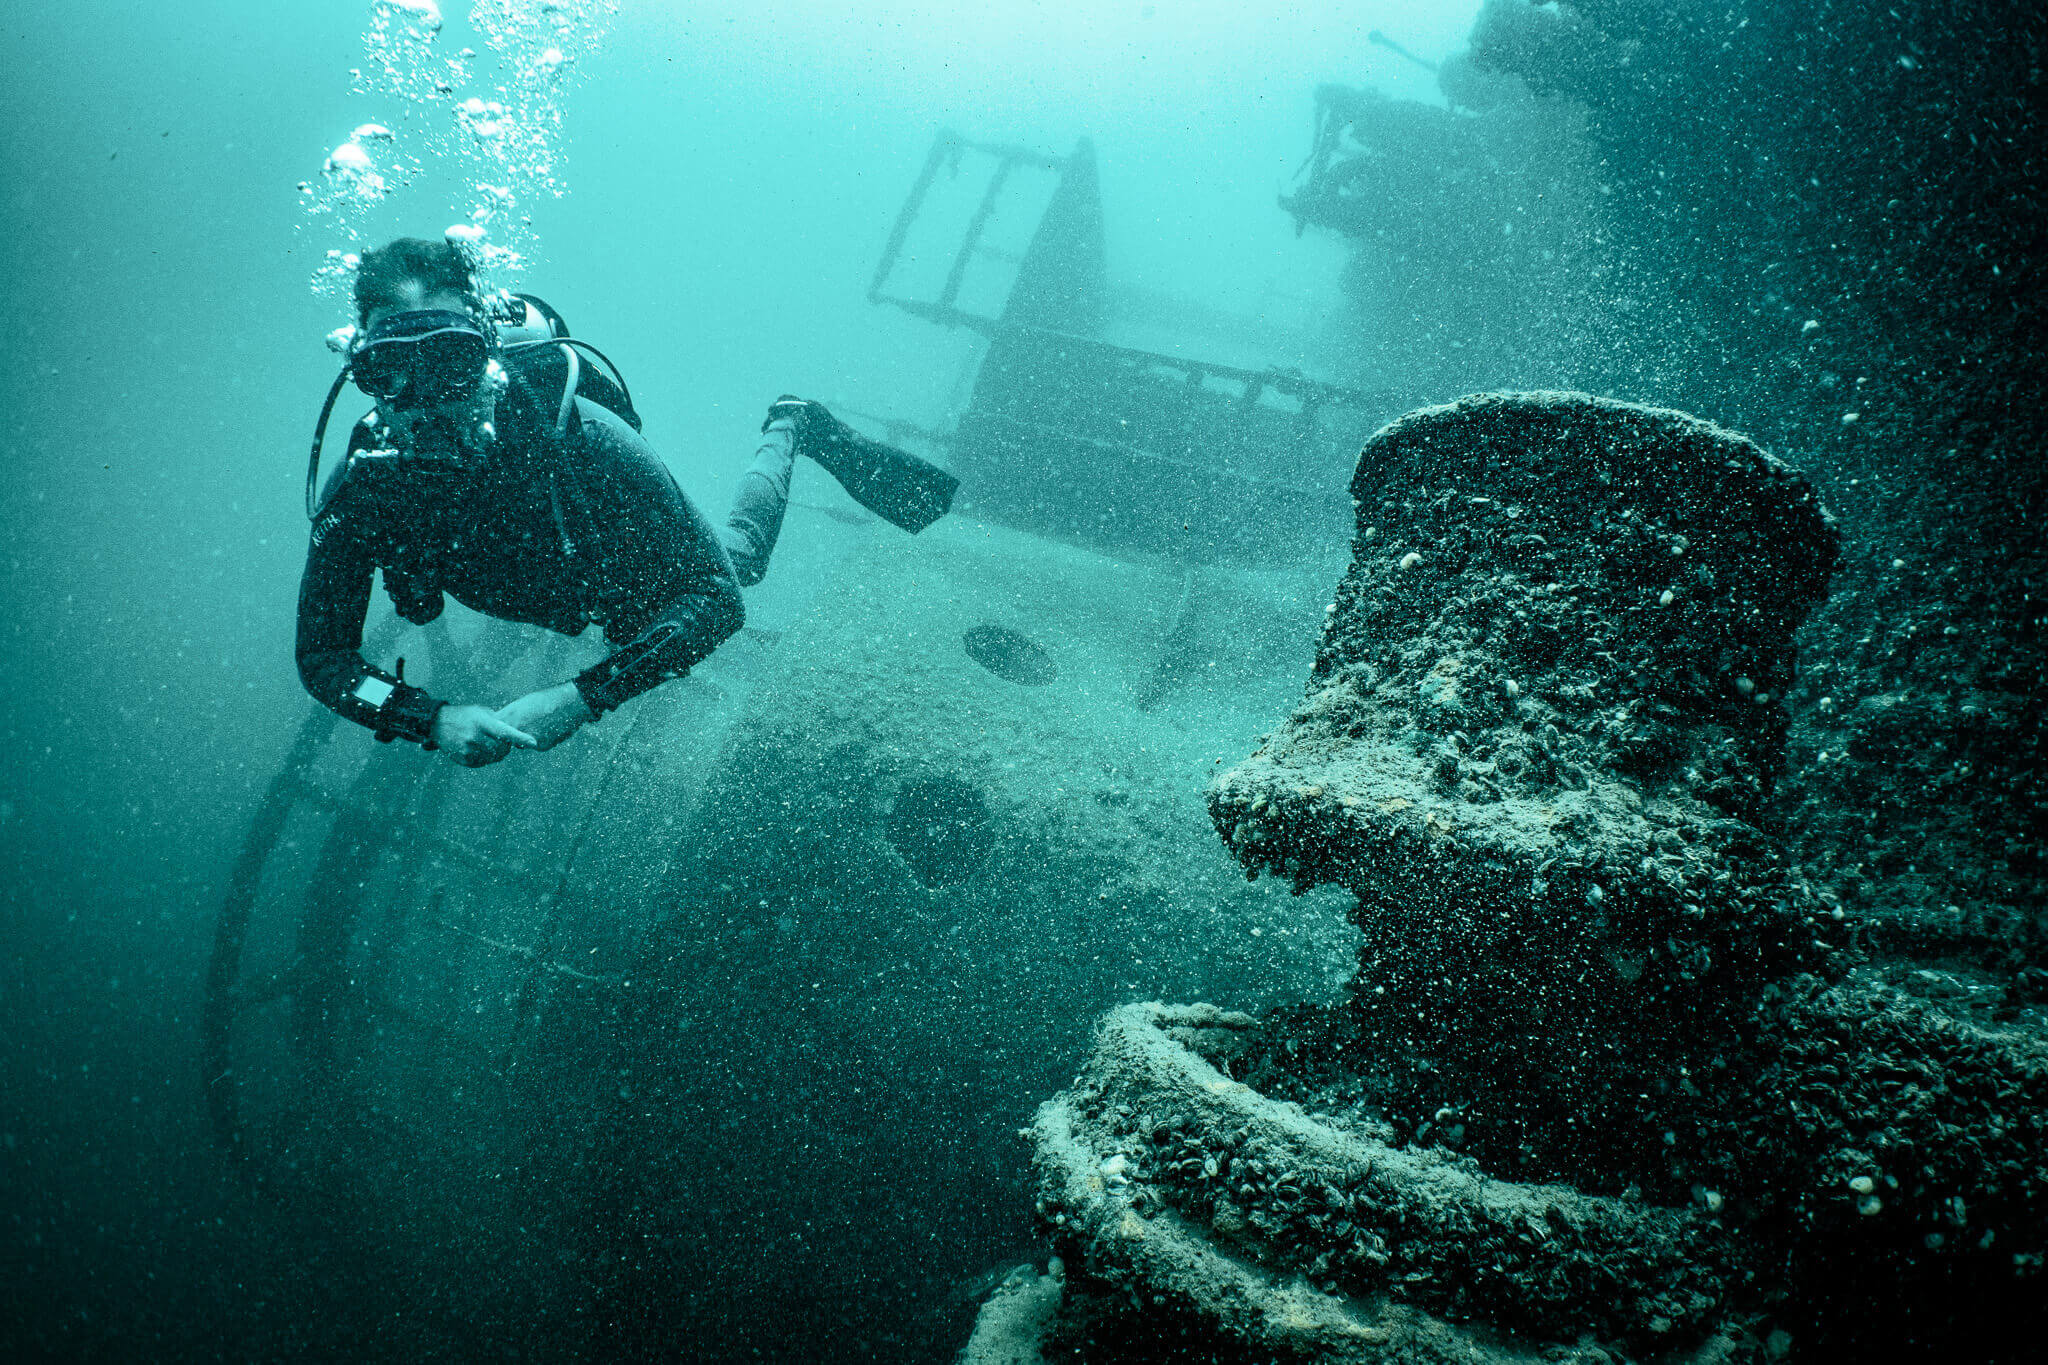 Underwater photo of a scuba diver in front of the superstructure of the Keystorm shipwreck